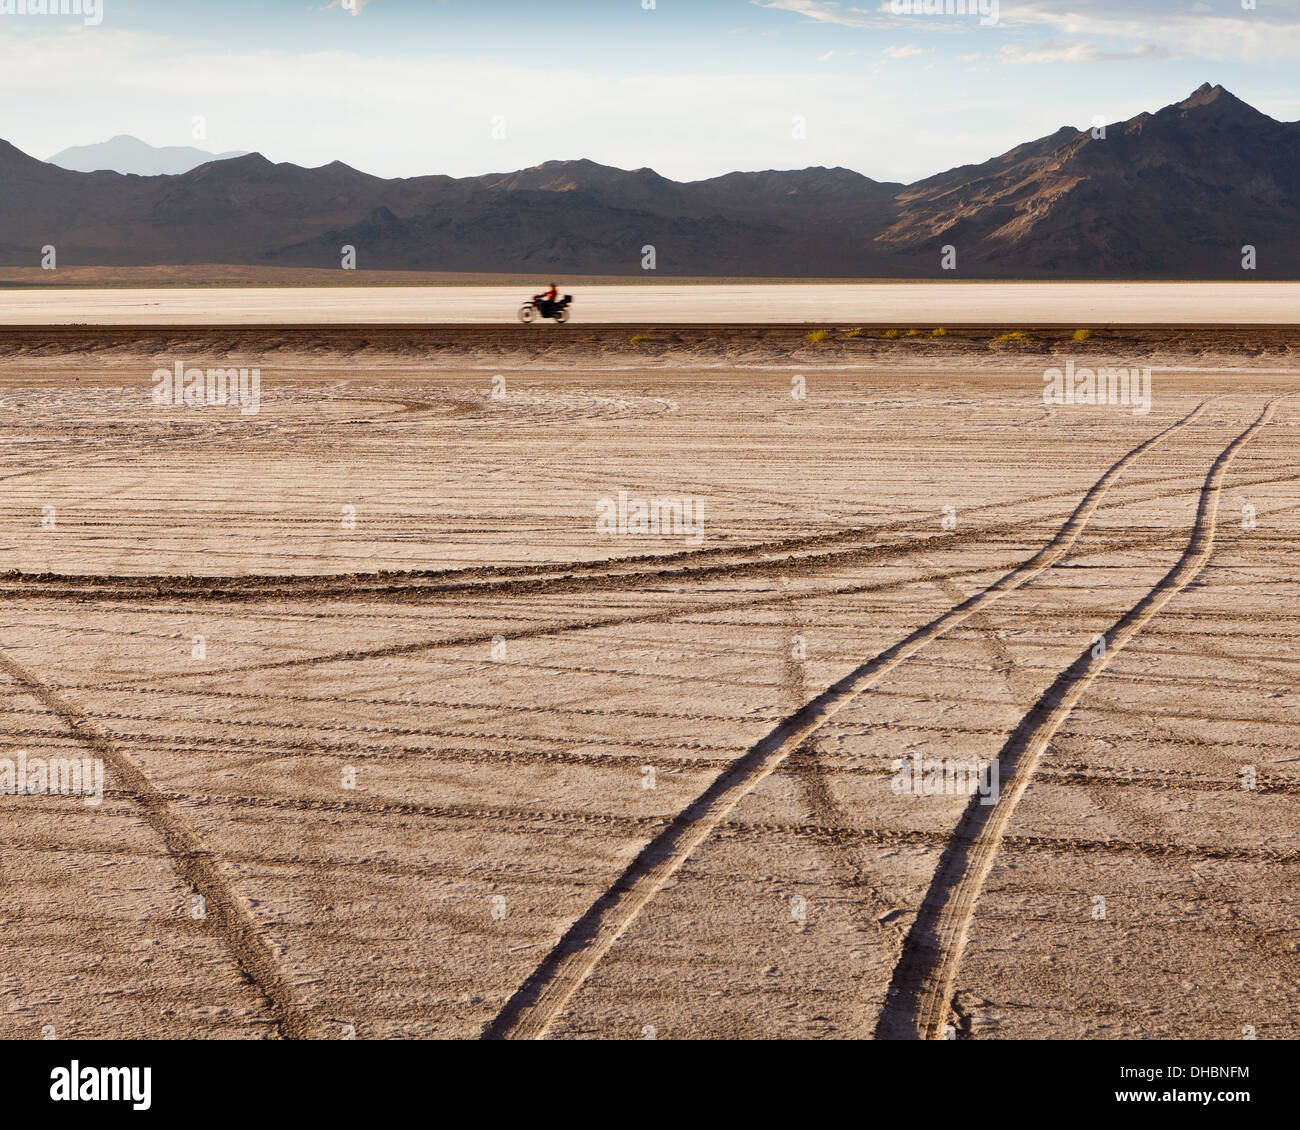 Page 2 - Salt Flats Car Speed High Resolution Stock Photography and Images  - Alamy